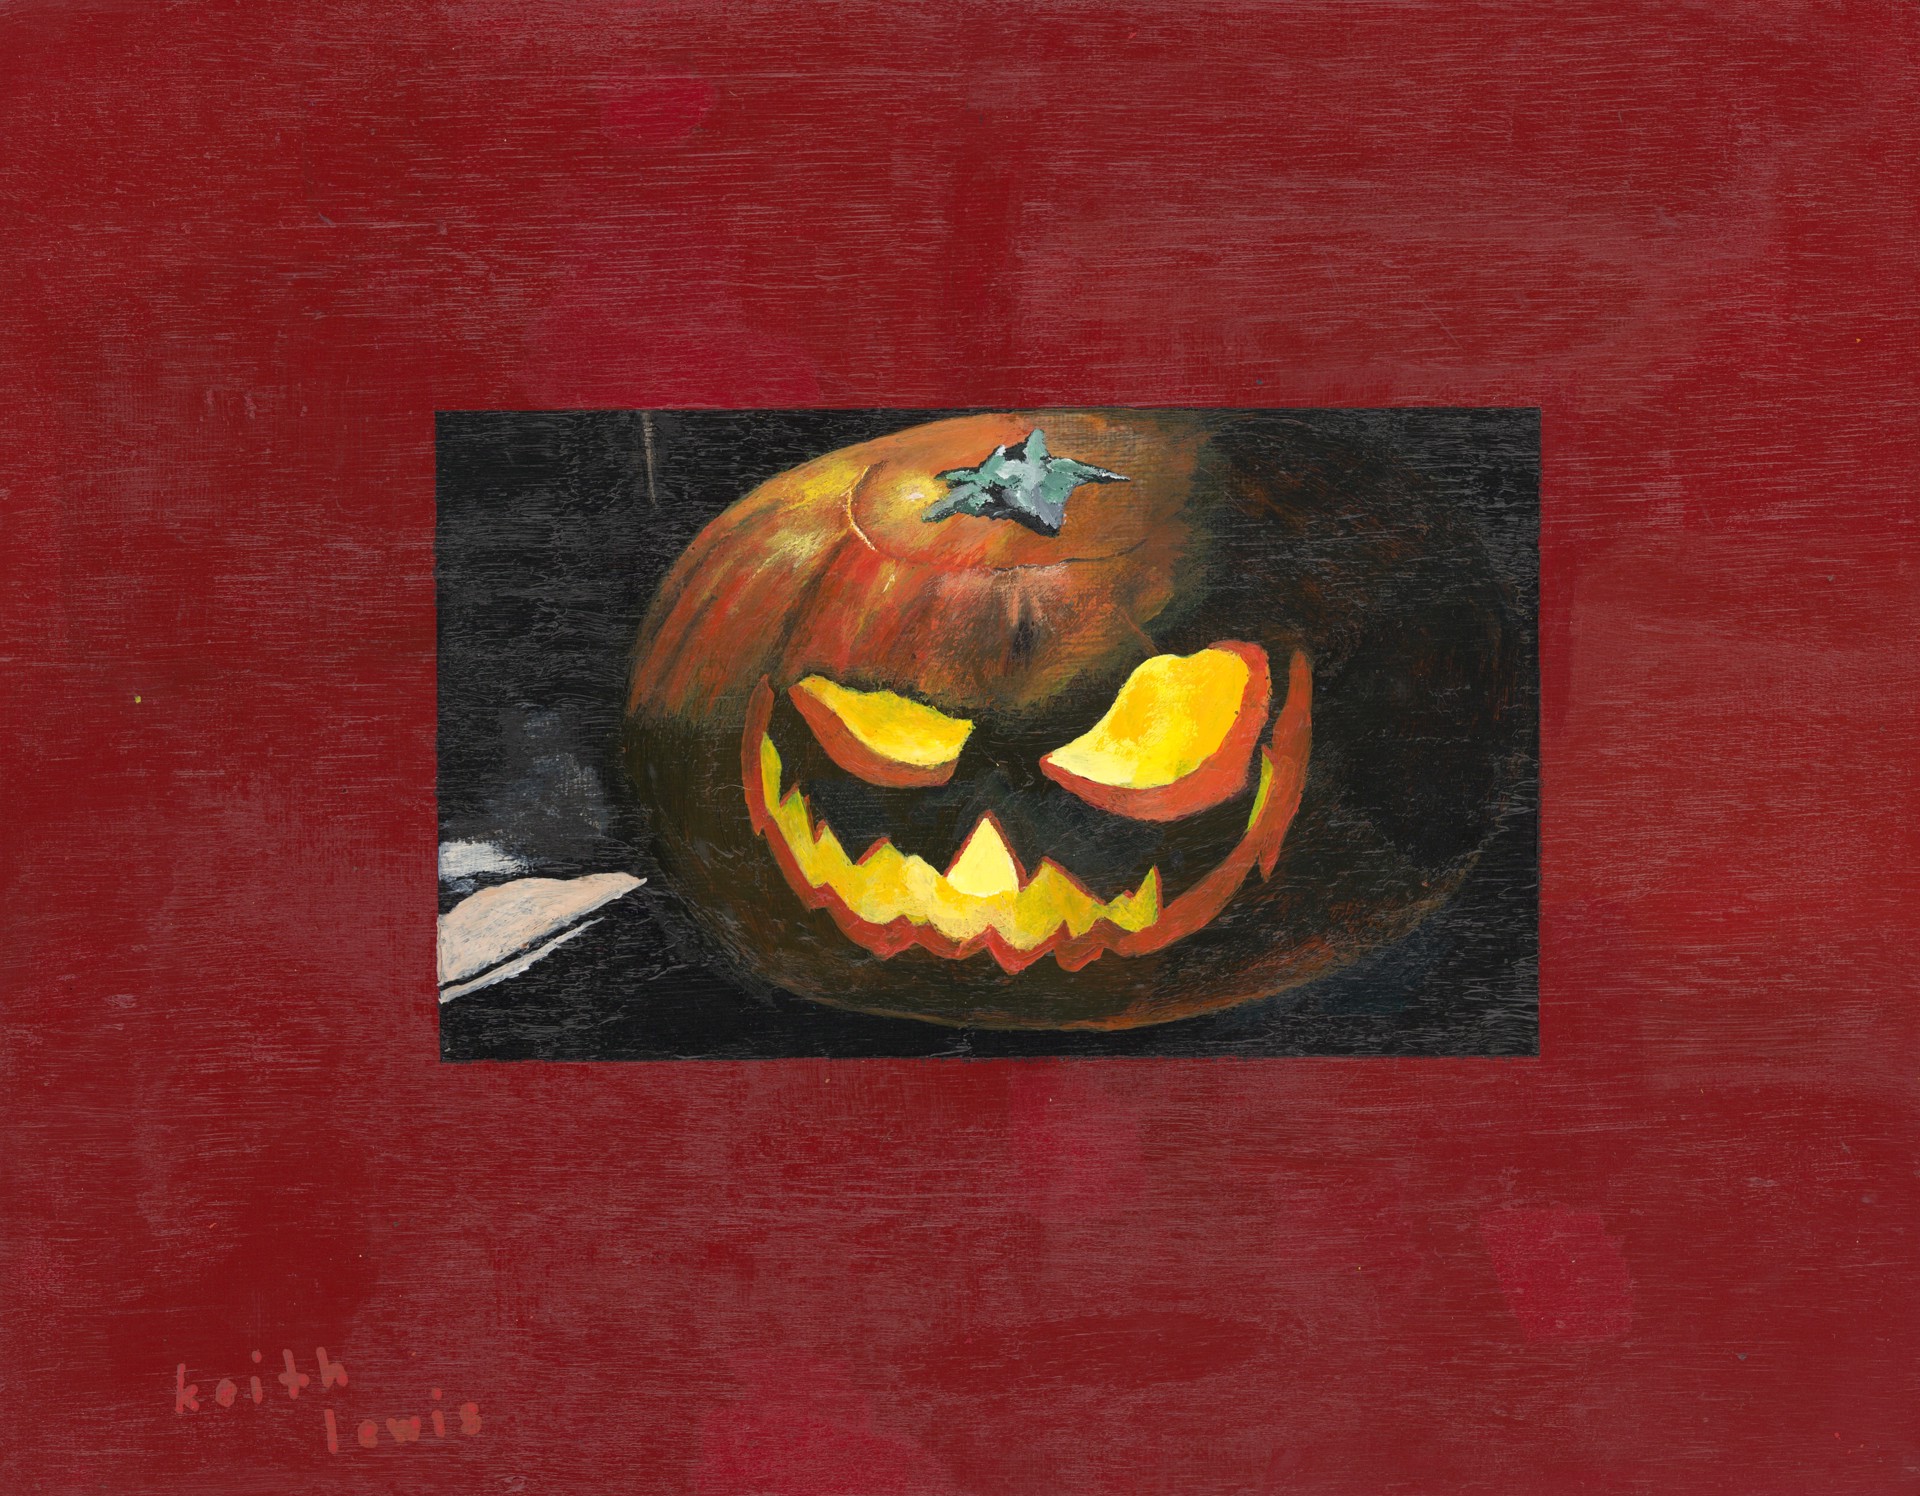 A Halloween Story by Keith Lewis